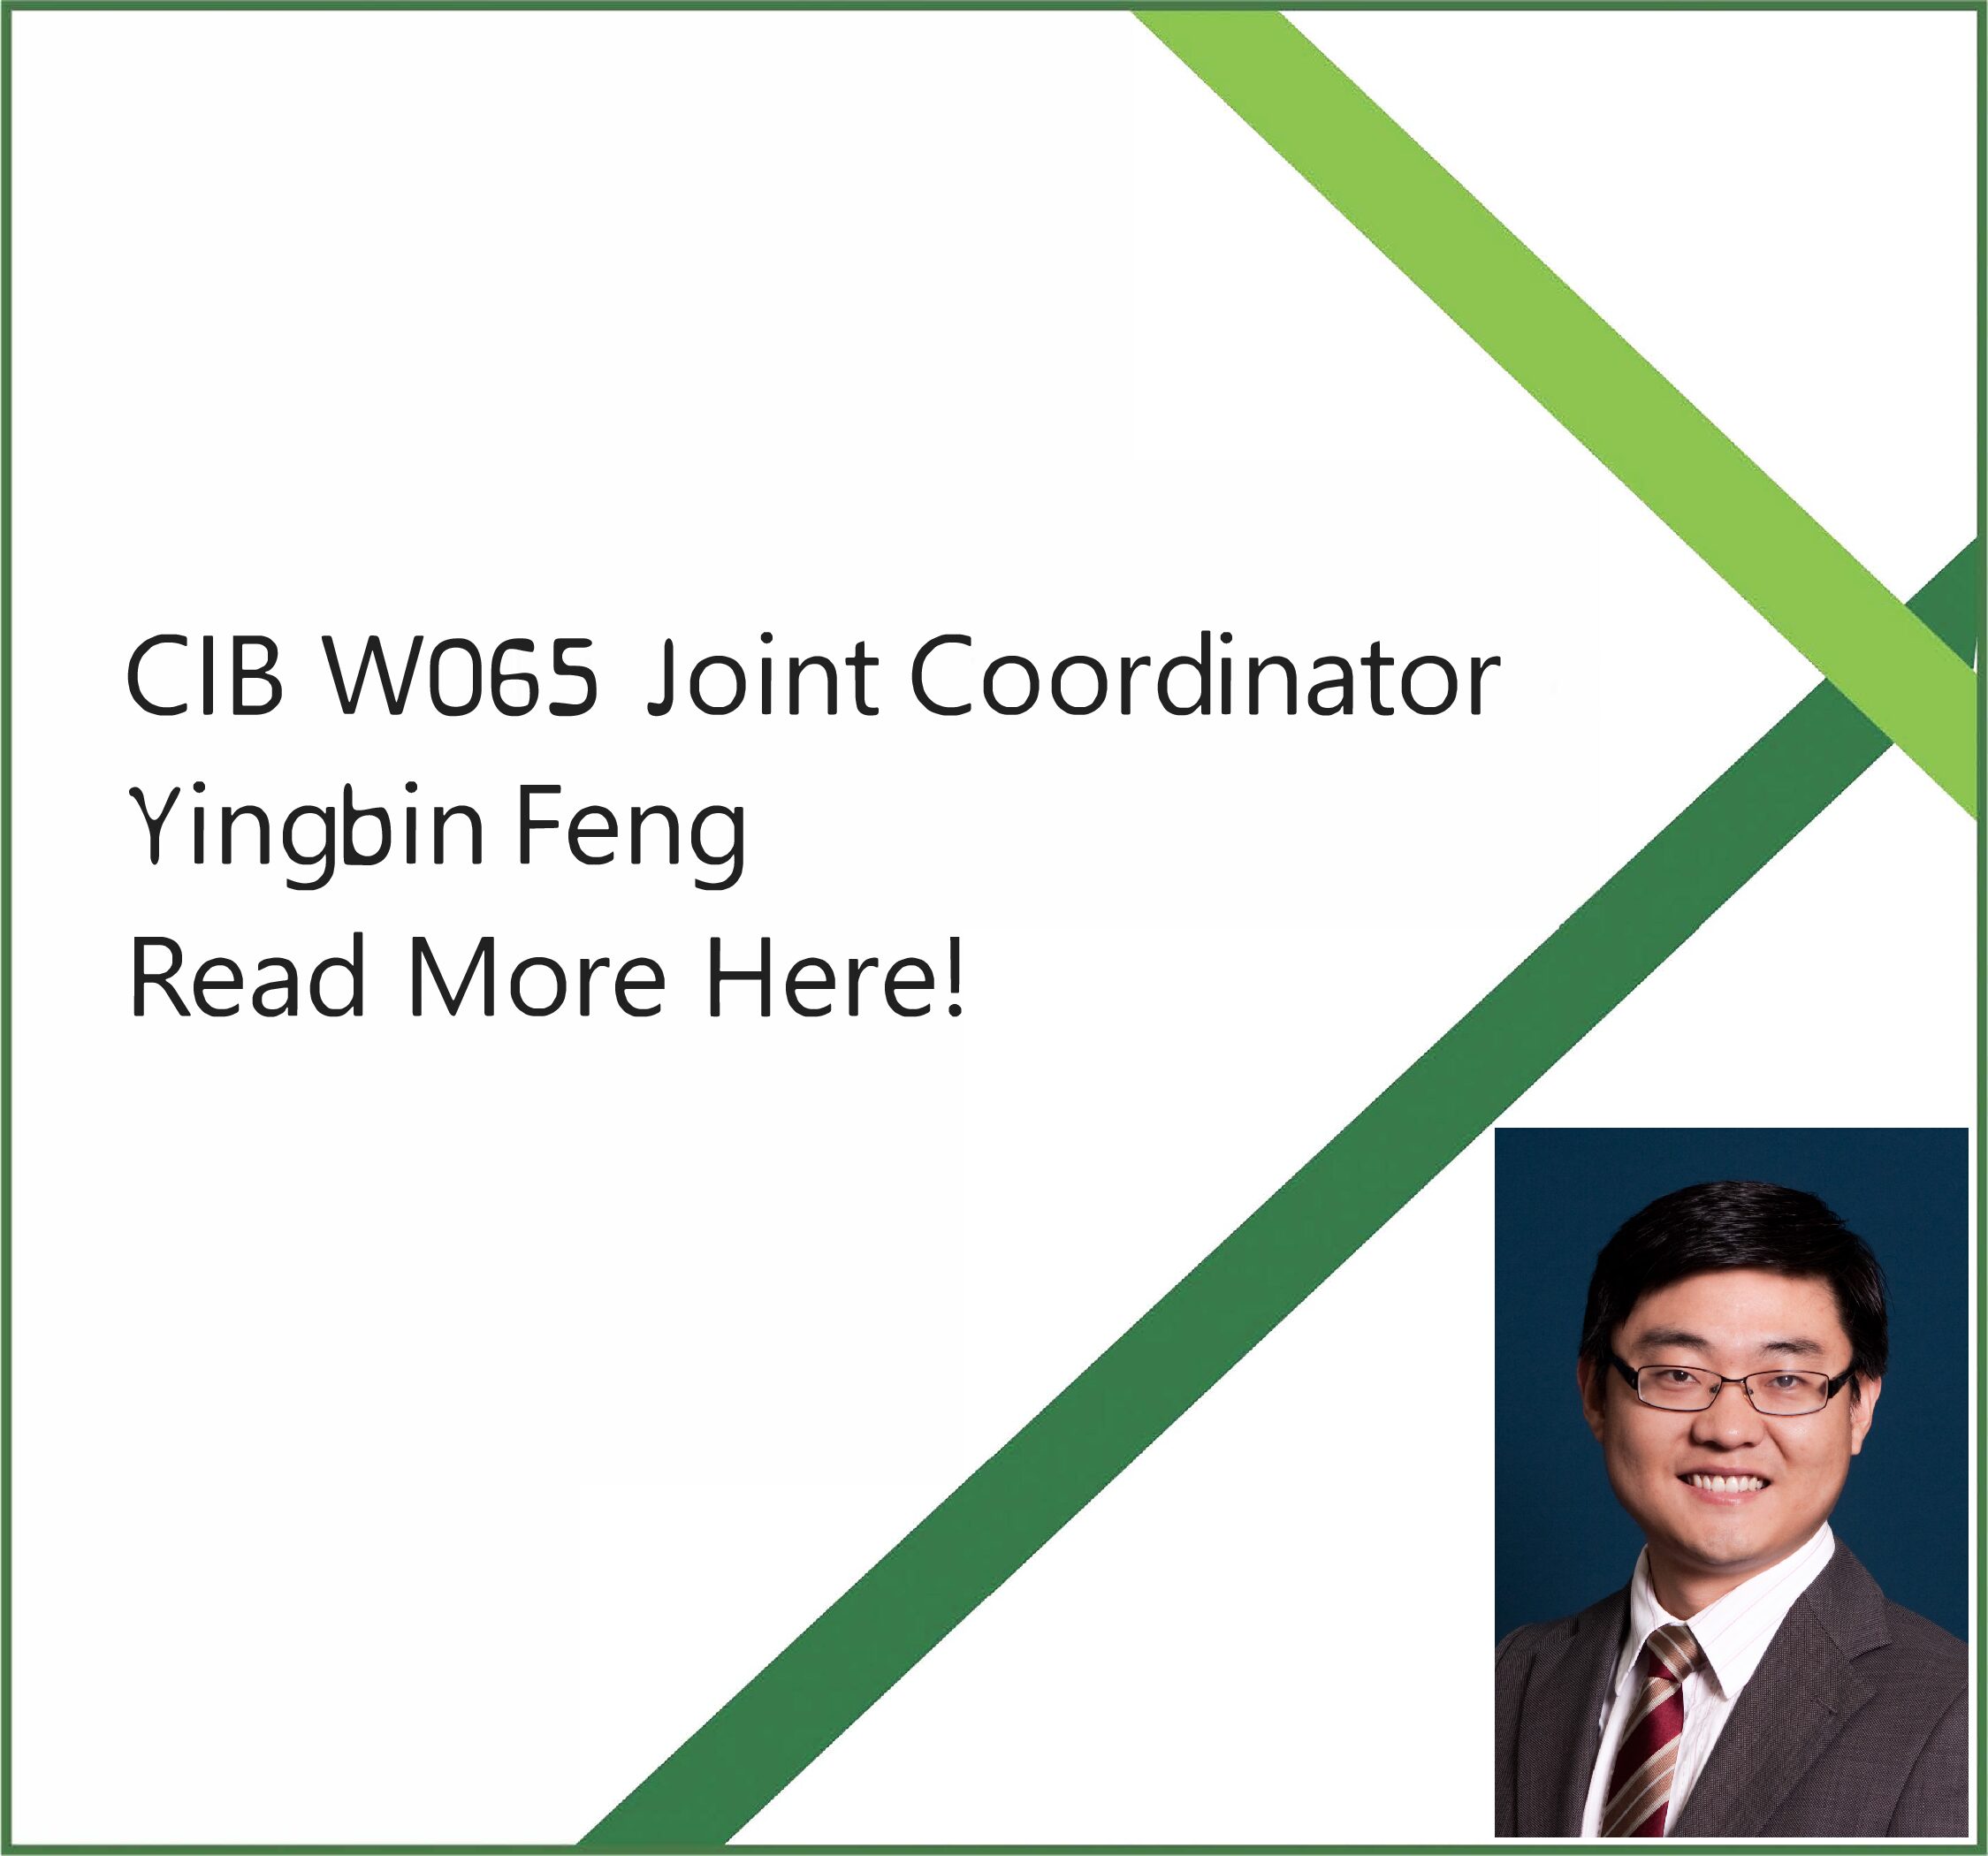 Yingbin Feng, Joint Coordinator of CIB W065, Organisation and Management of Construction